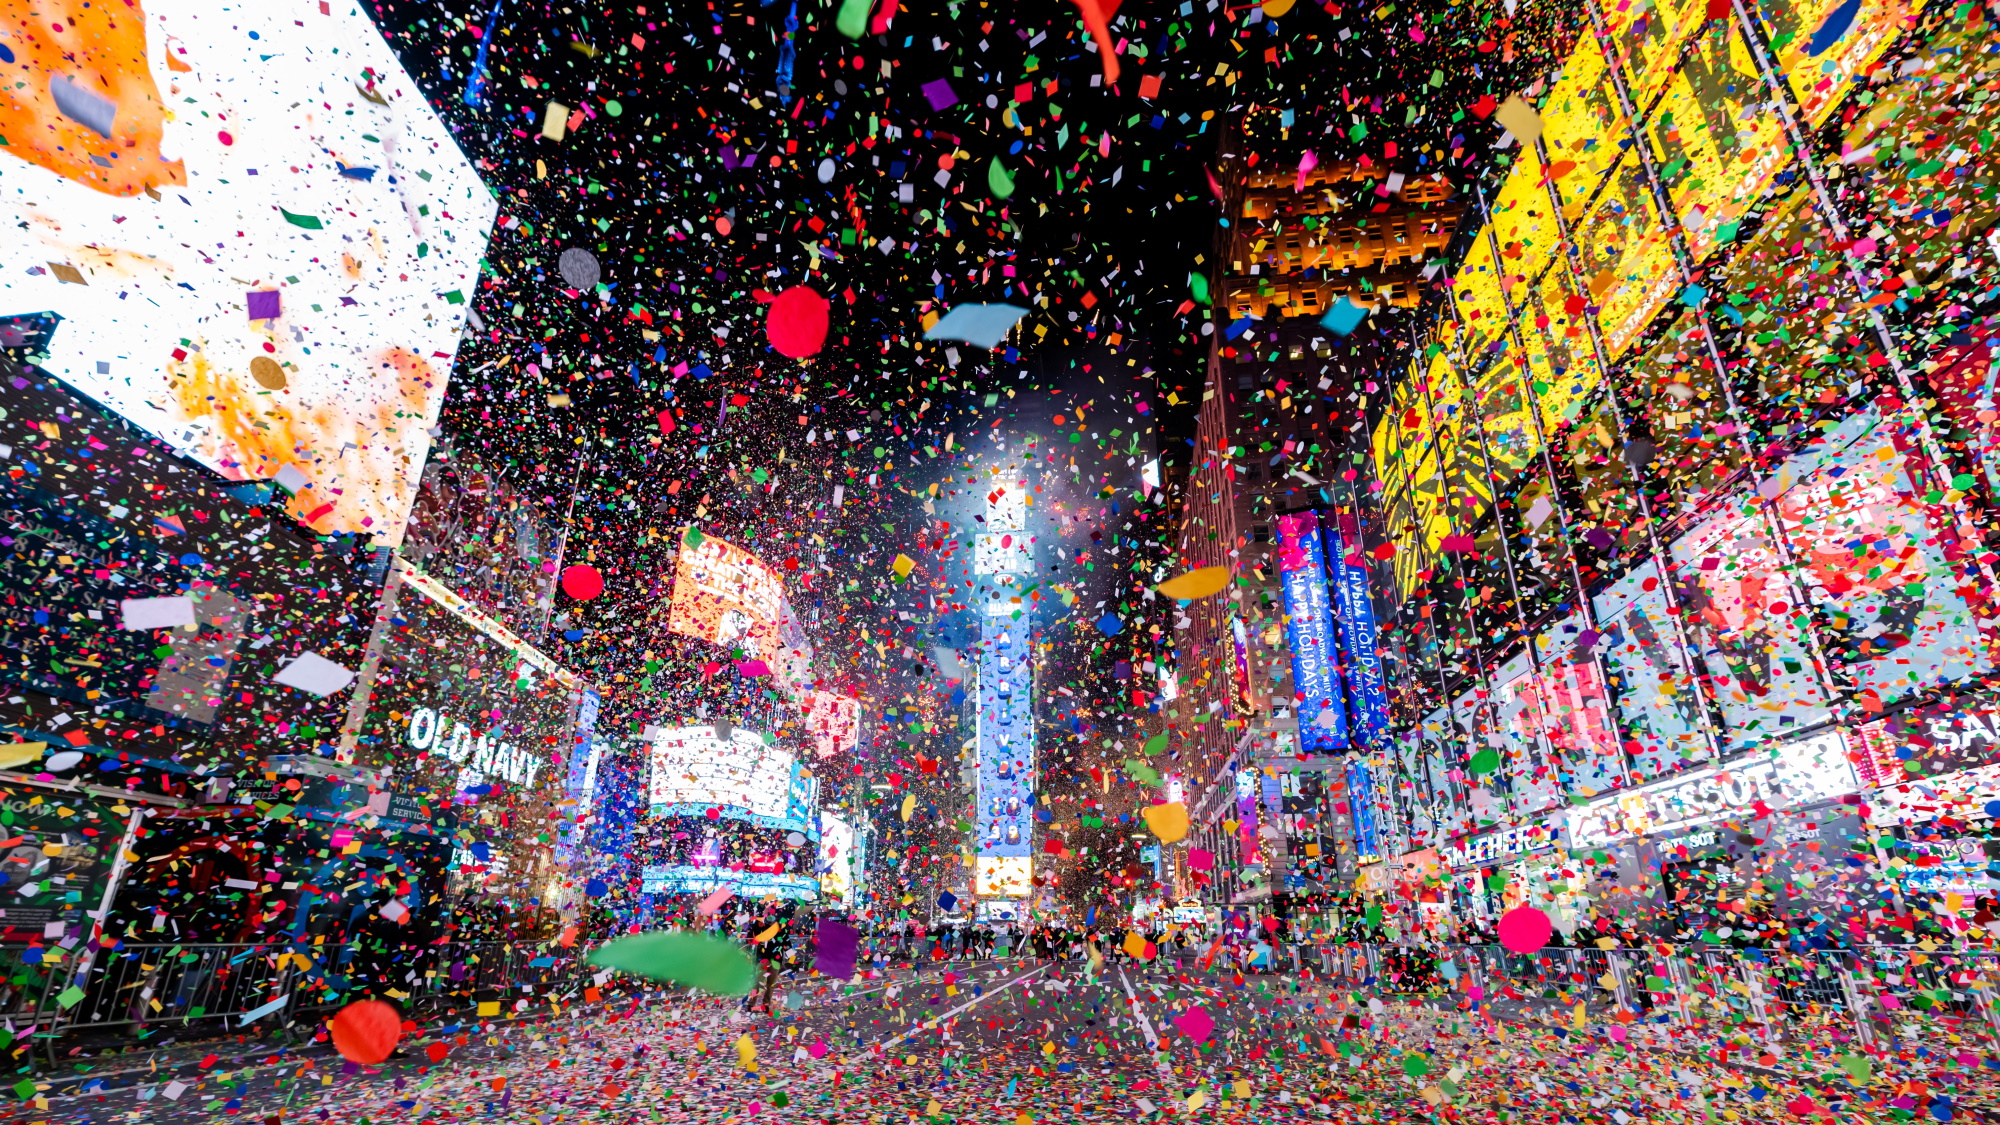 Times Square sits empty while fireworks and confetti are displayed at the 2021 New Year's Eve celebration in Times Square on December 31, 2020